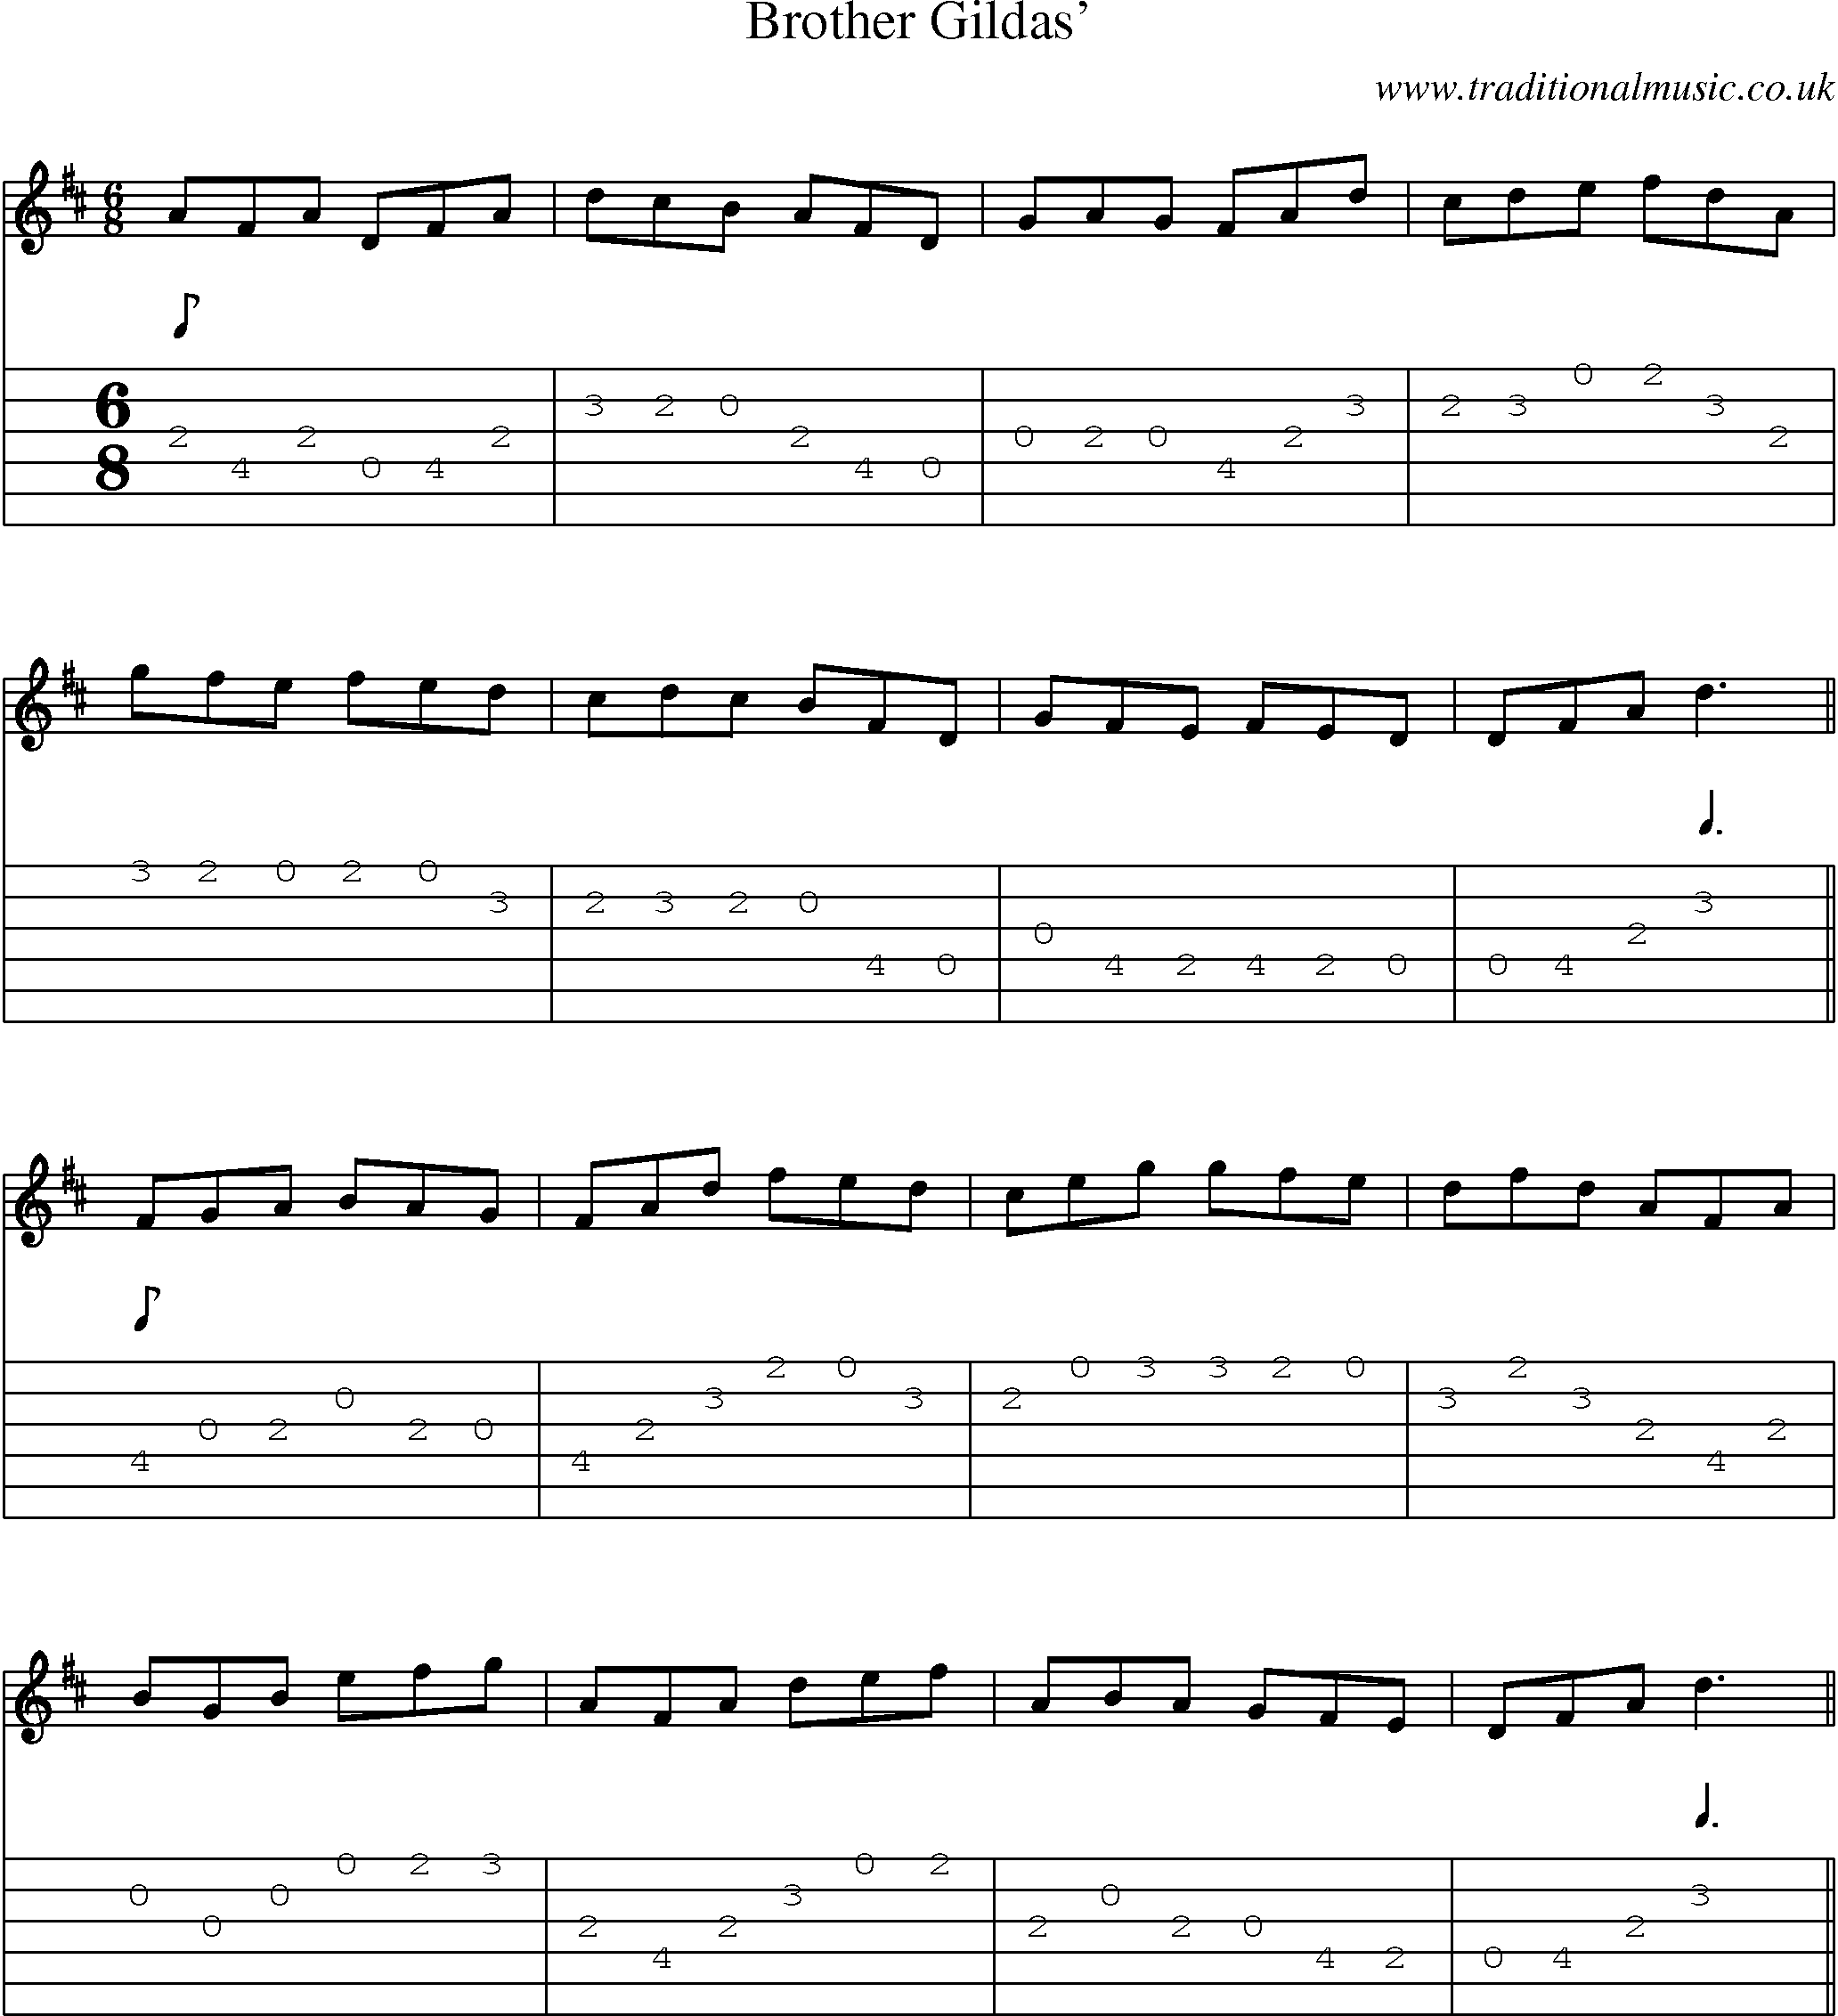 Music Score and Guitar Tabs for Brother Gildas